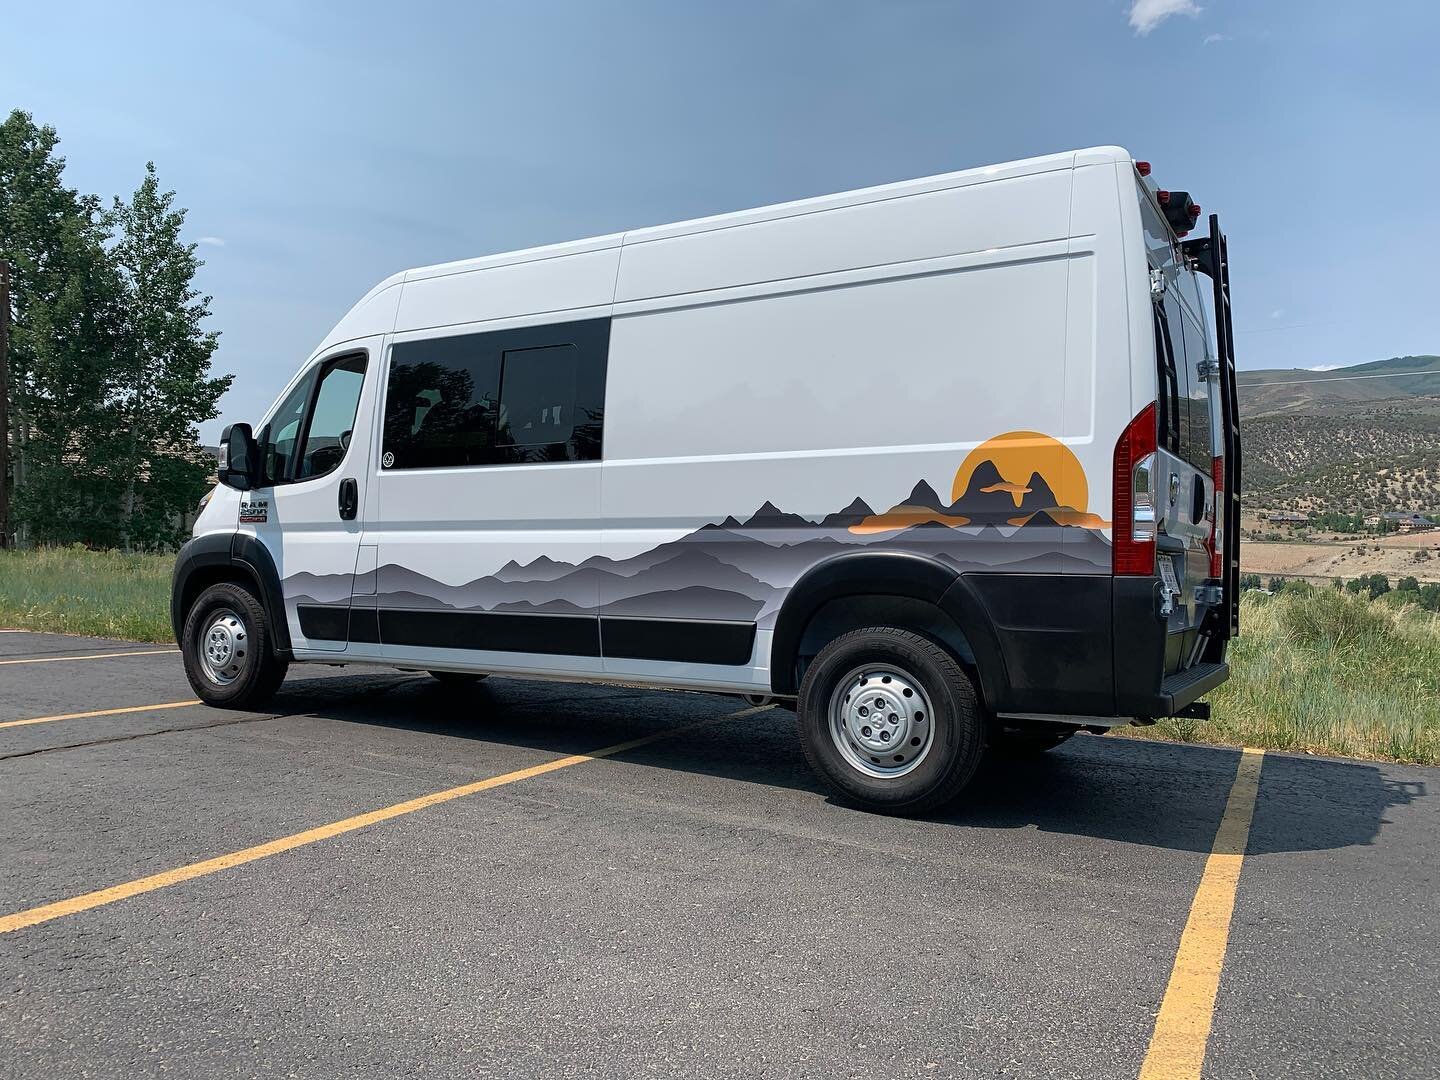 Personal camper van wrapped with mountains. We make boring white vans look more interesting.